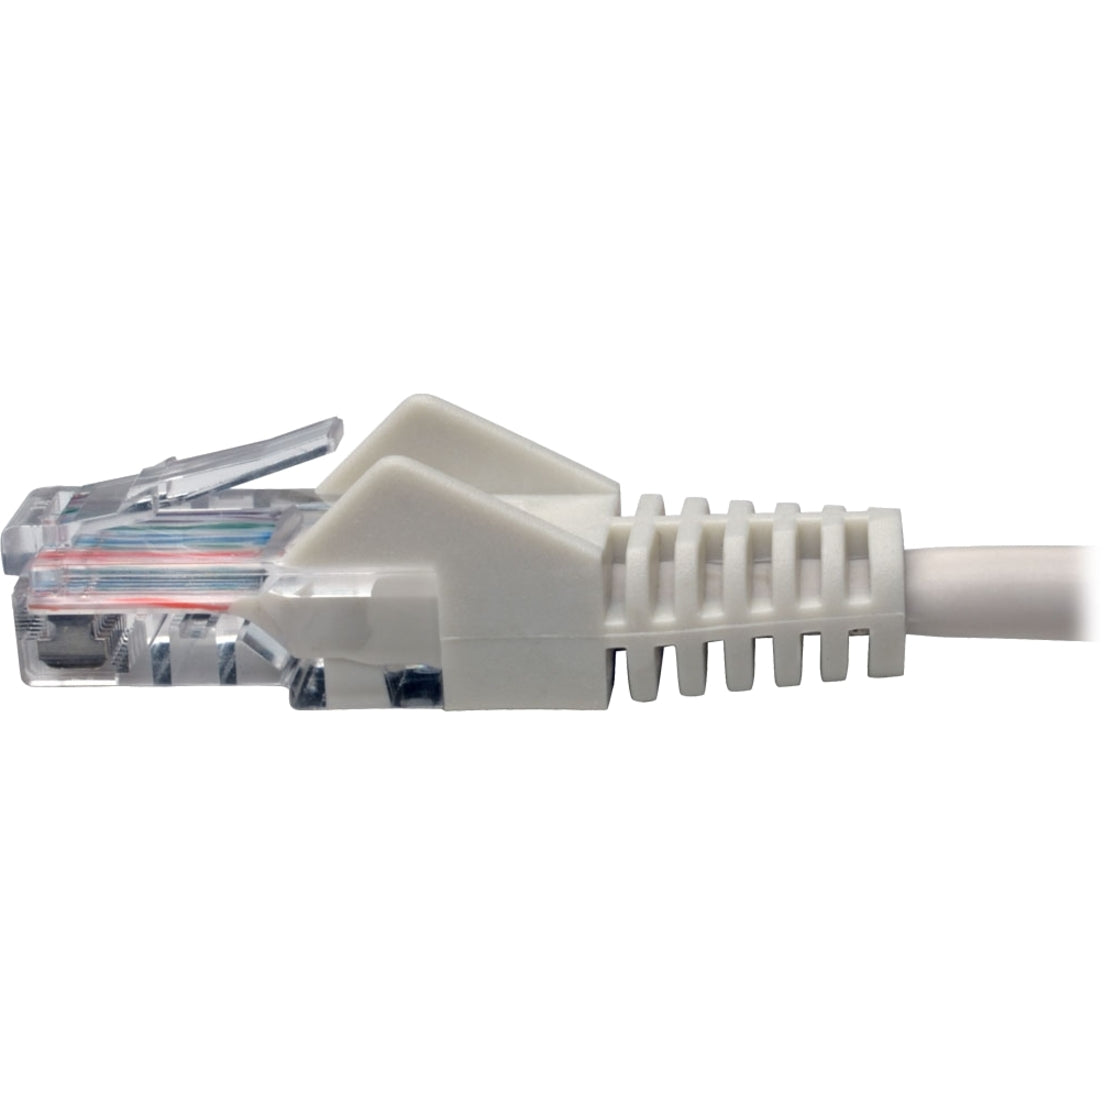 Tripp Lite N001-005-WH Cat5e 350 MHz Snagless Molded UTP Patch Cable, White, 5 ft.